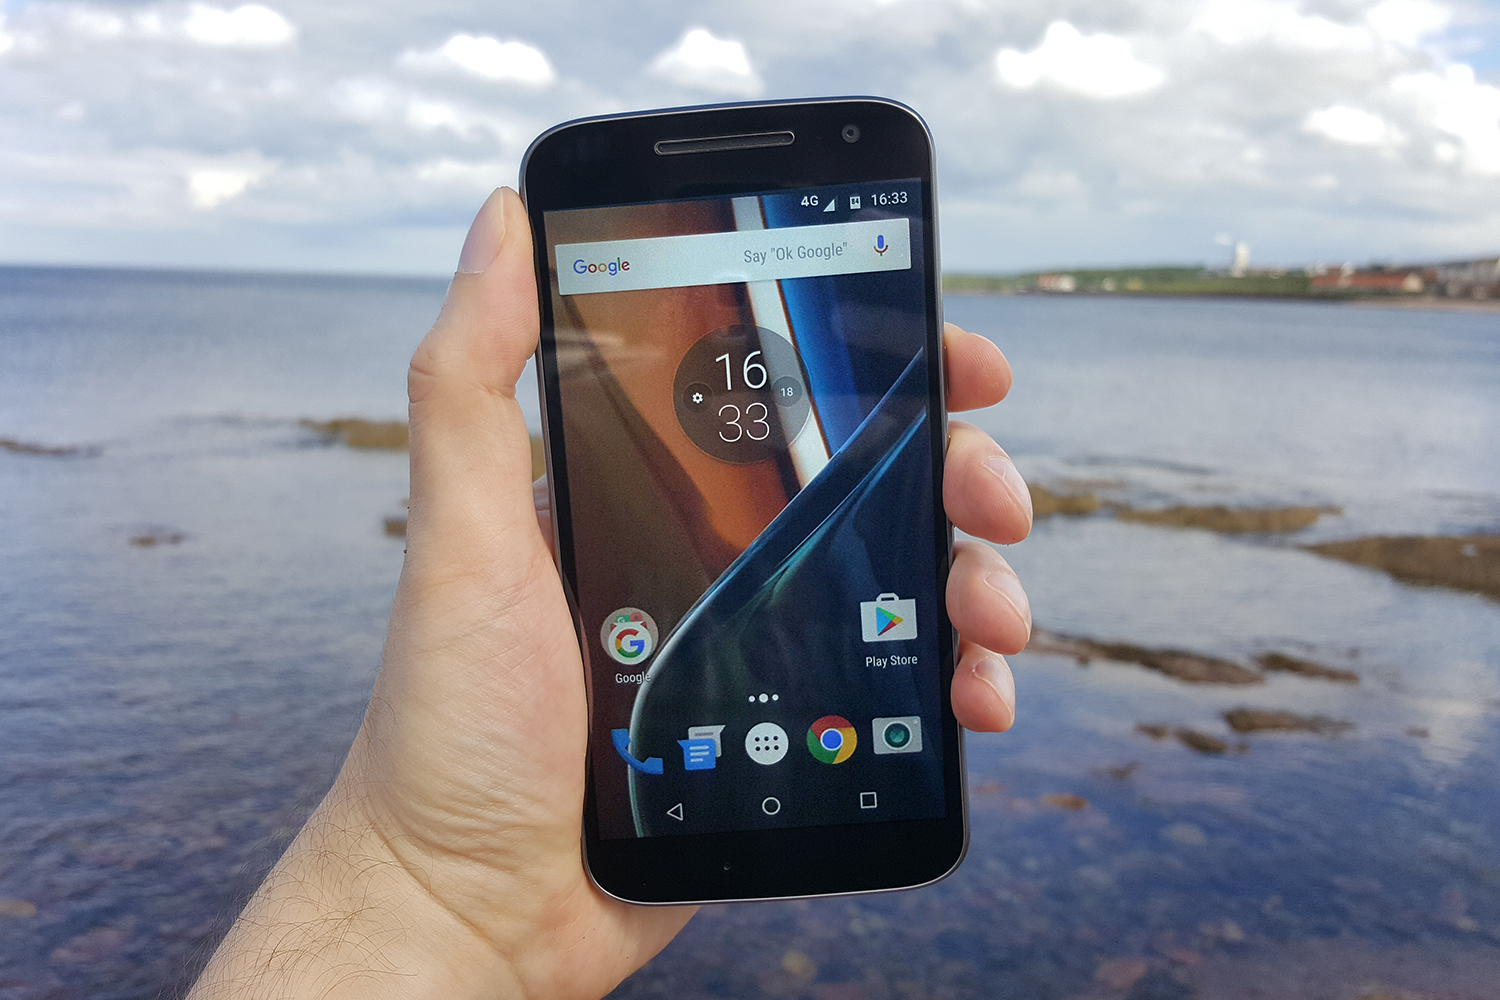 Confirmed: Moto G4 Play getting Android Nougat in June